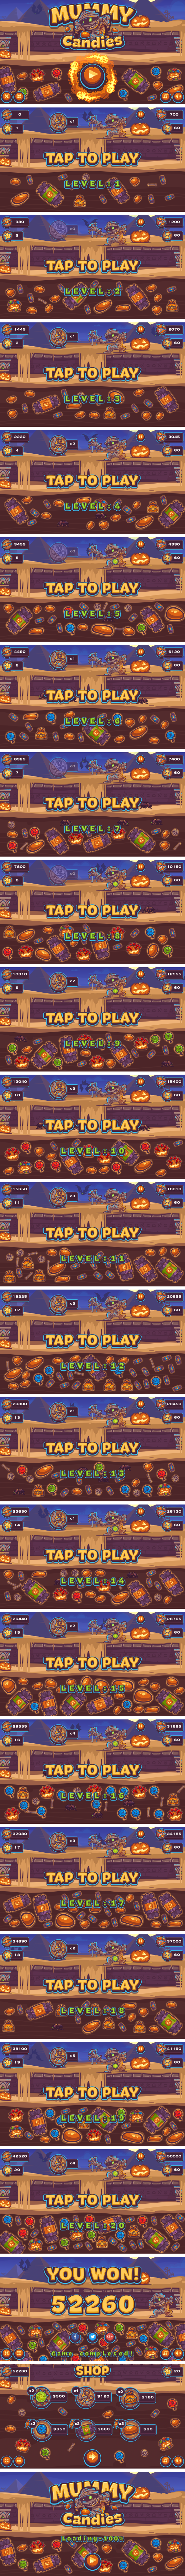 Mummy Sweets - HTML5 Game 20 Levels + Mobile Version!  (Construction 3 | Construct 2 | Capx) - 2